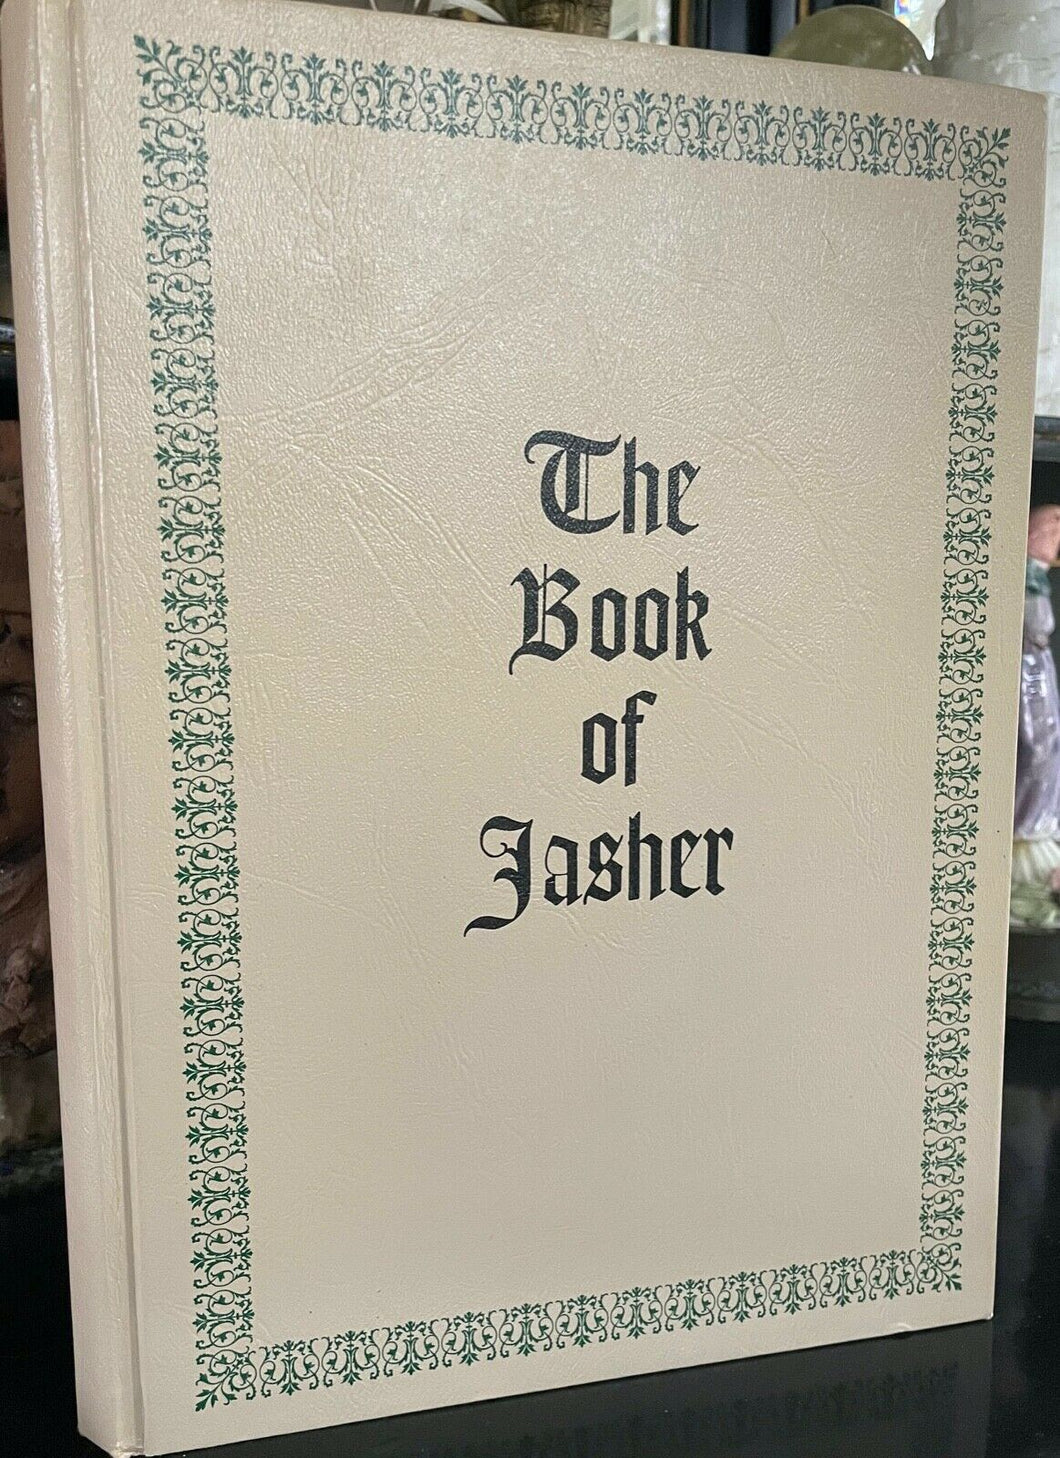 BOOK OF JASHER, SACRED BOOK OF THE BIBLE - 1969 ROSICRUCIAN AMORC MAGICK JEWS